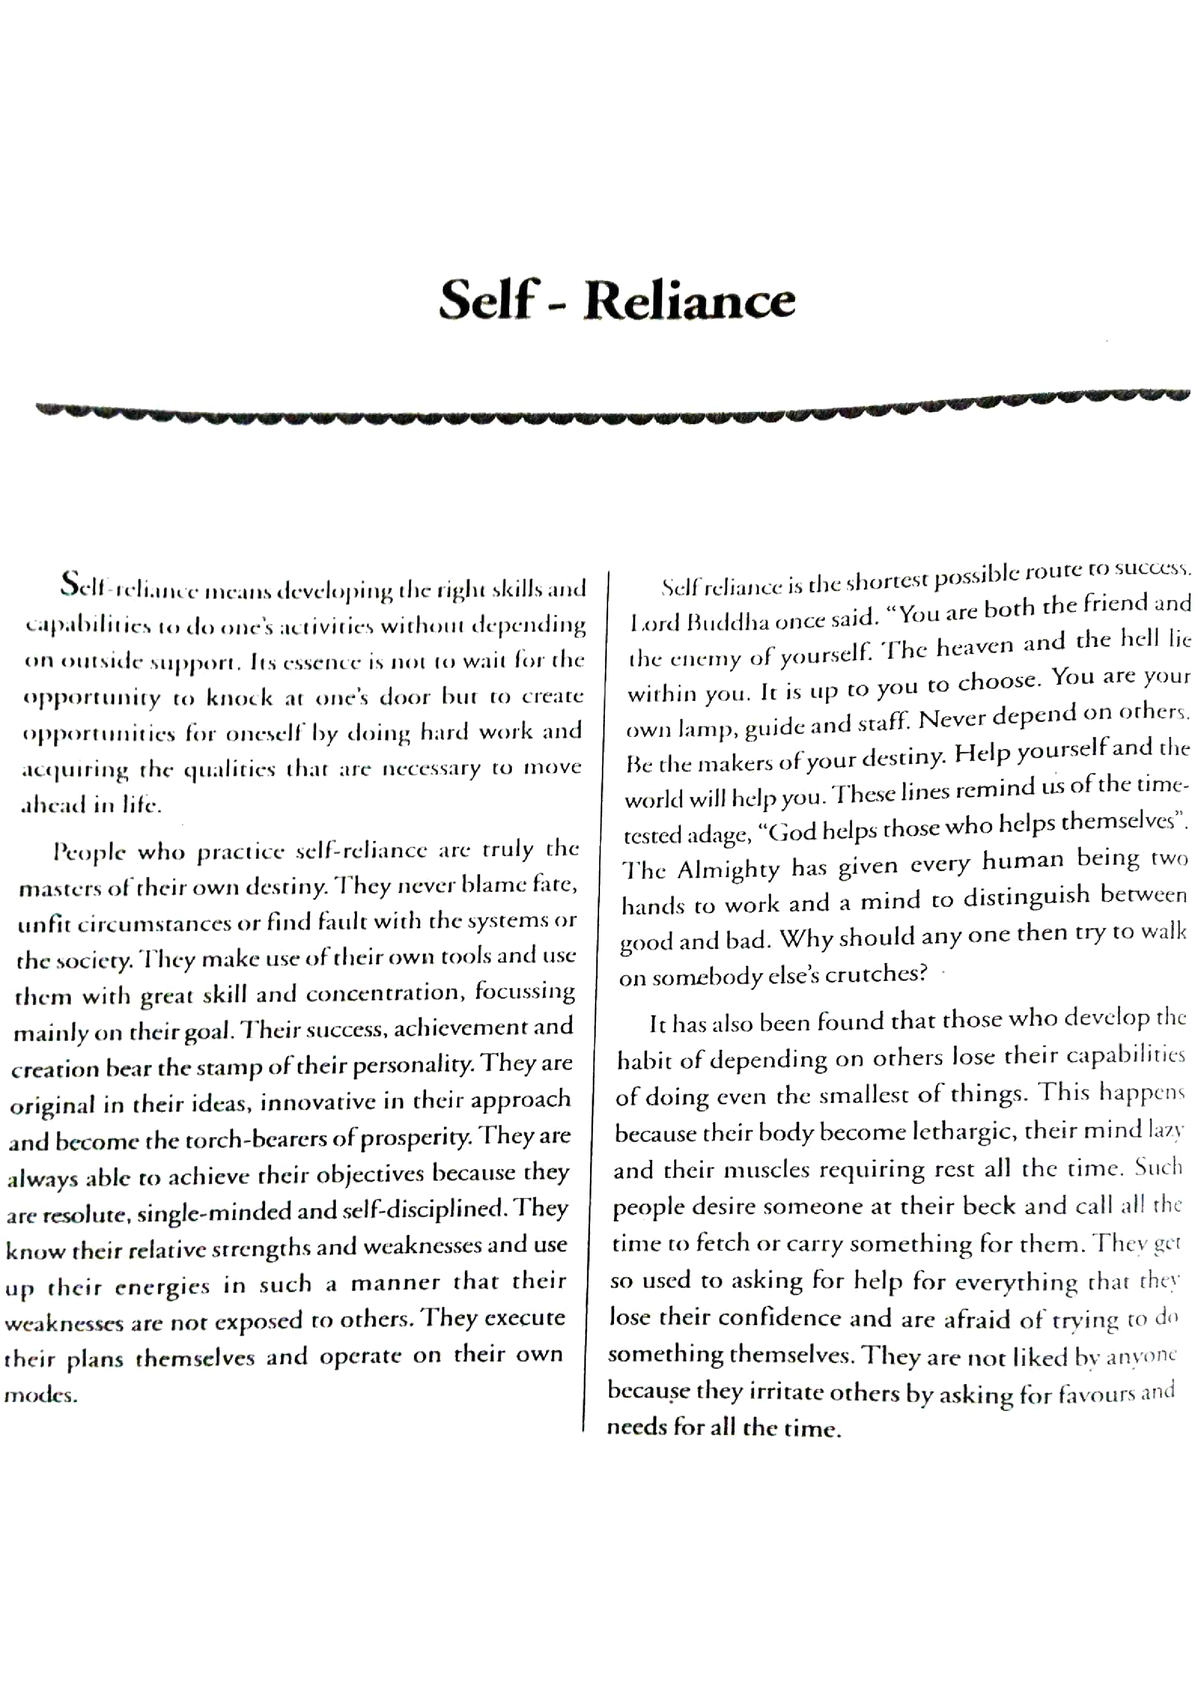 self reliance essay questions